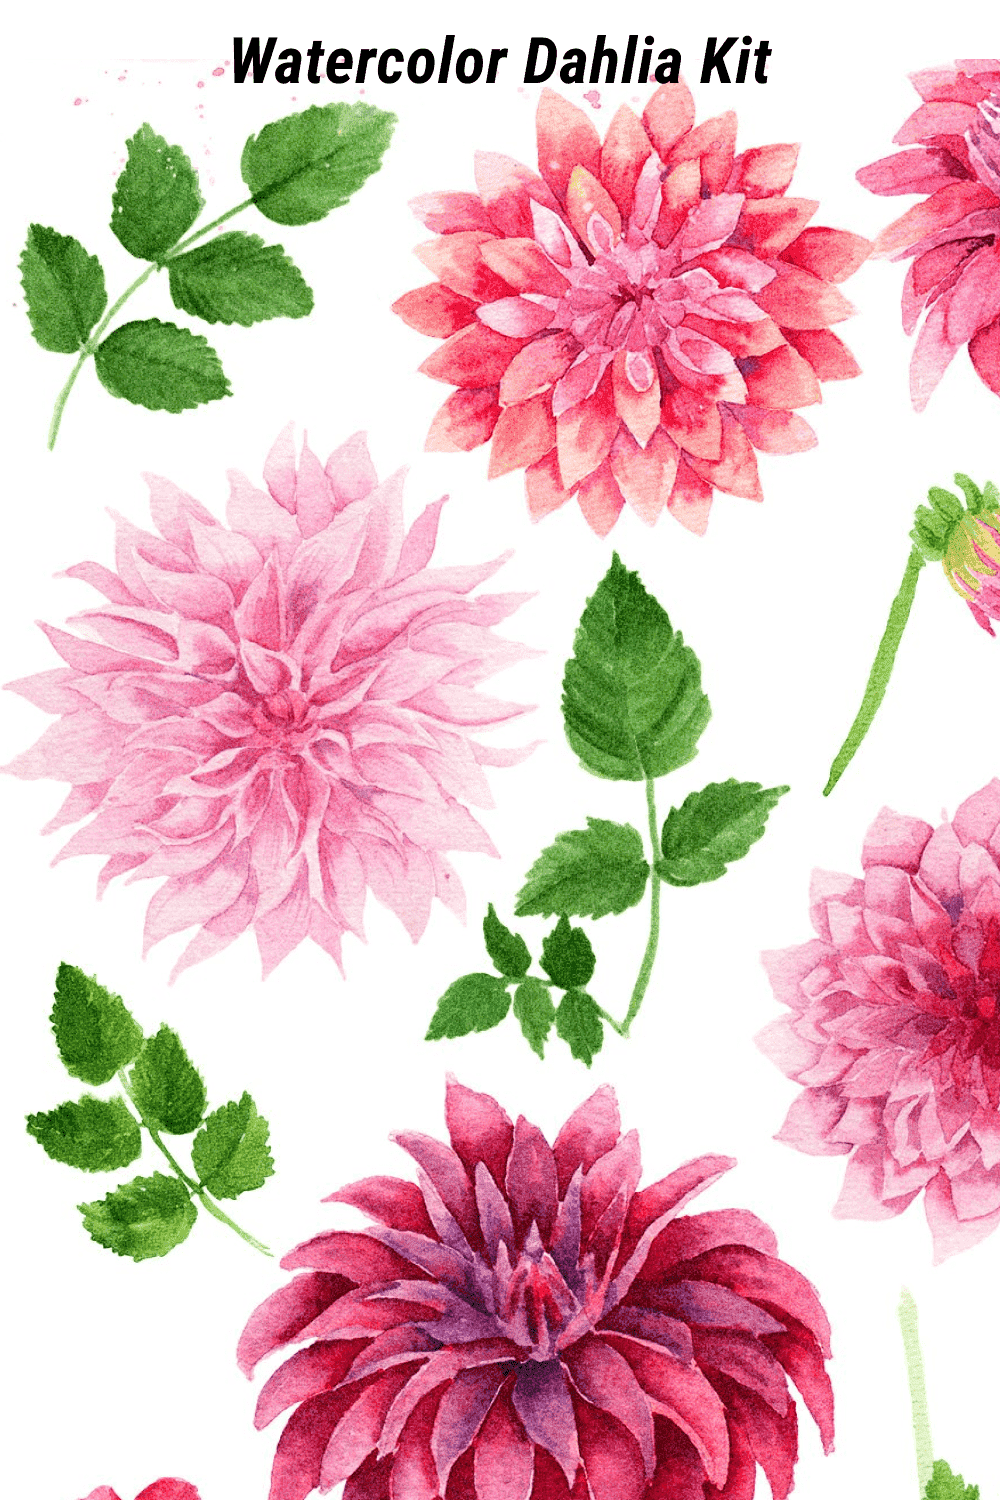 Watercolor Dahlias - Hand Painted Blooms And Textures Pinterest Image Preview.